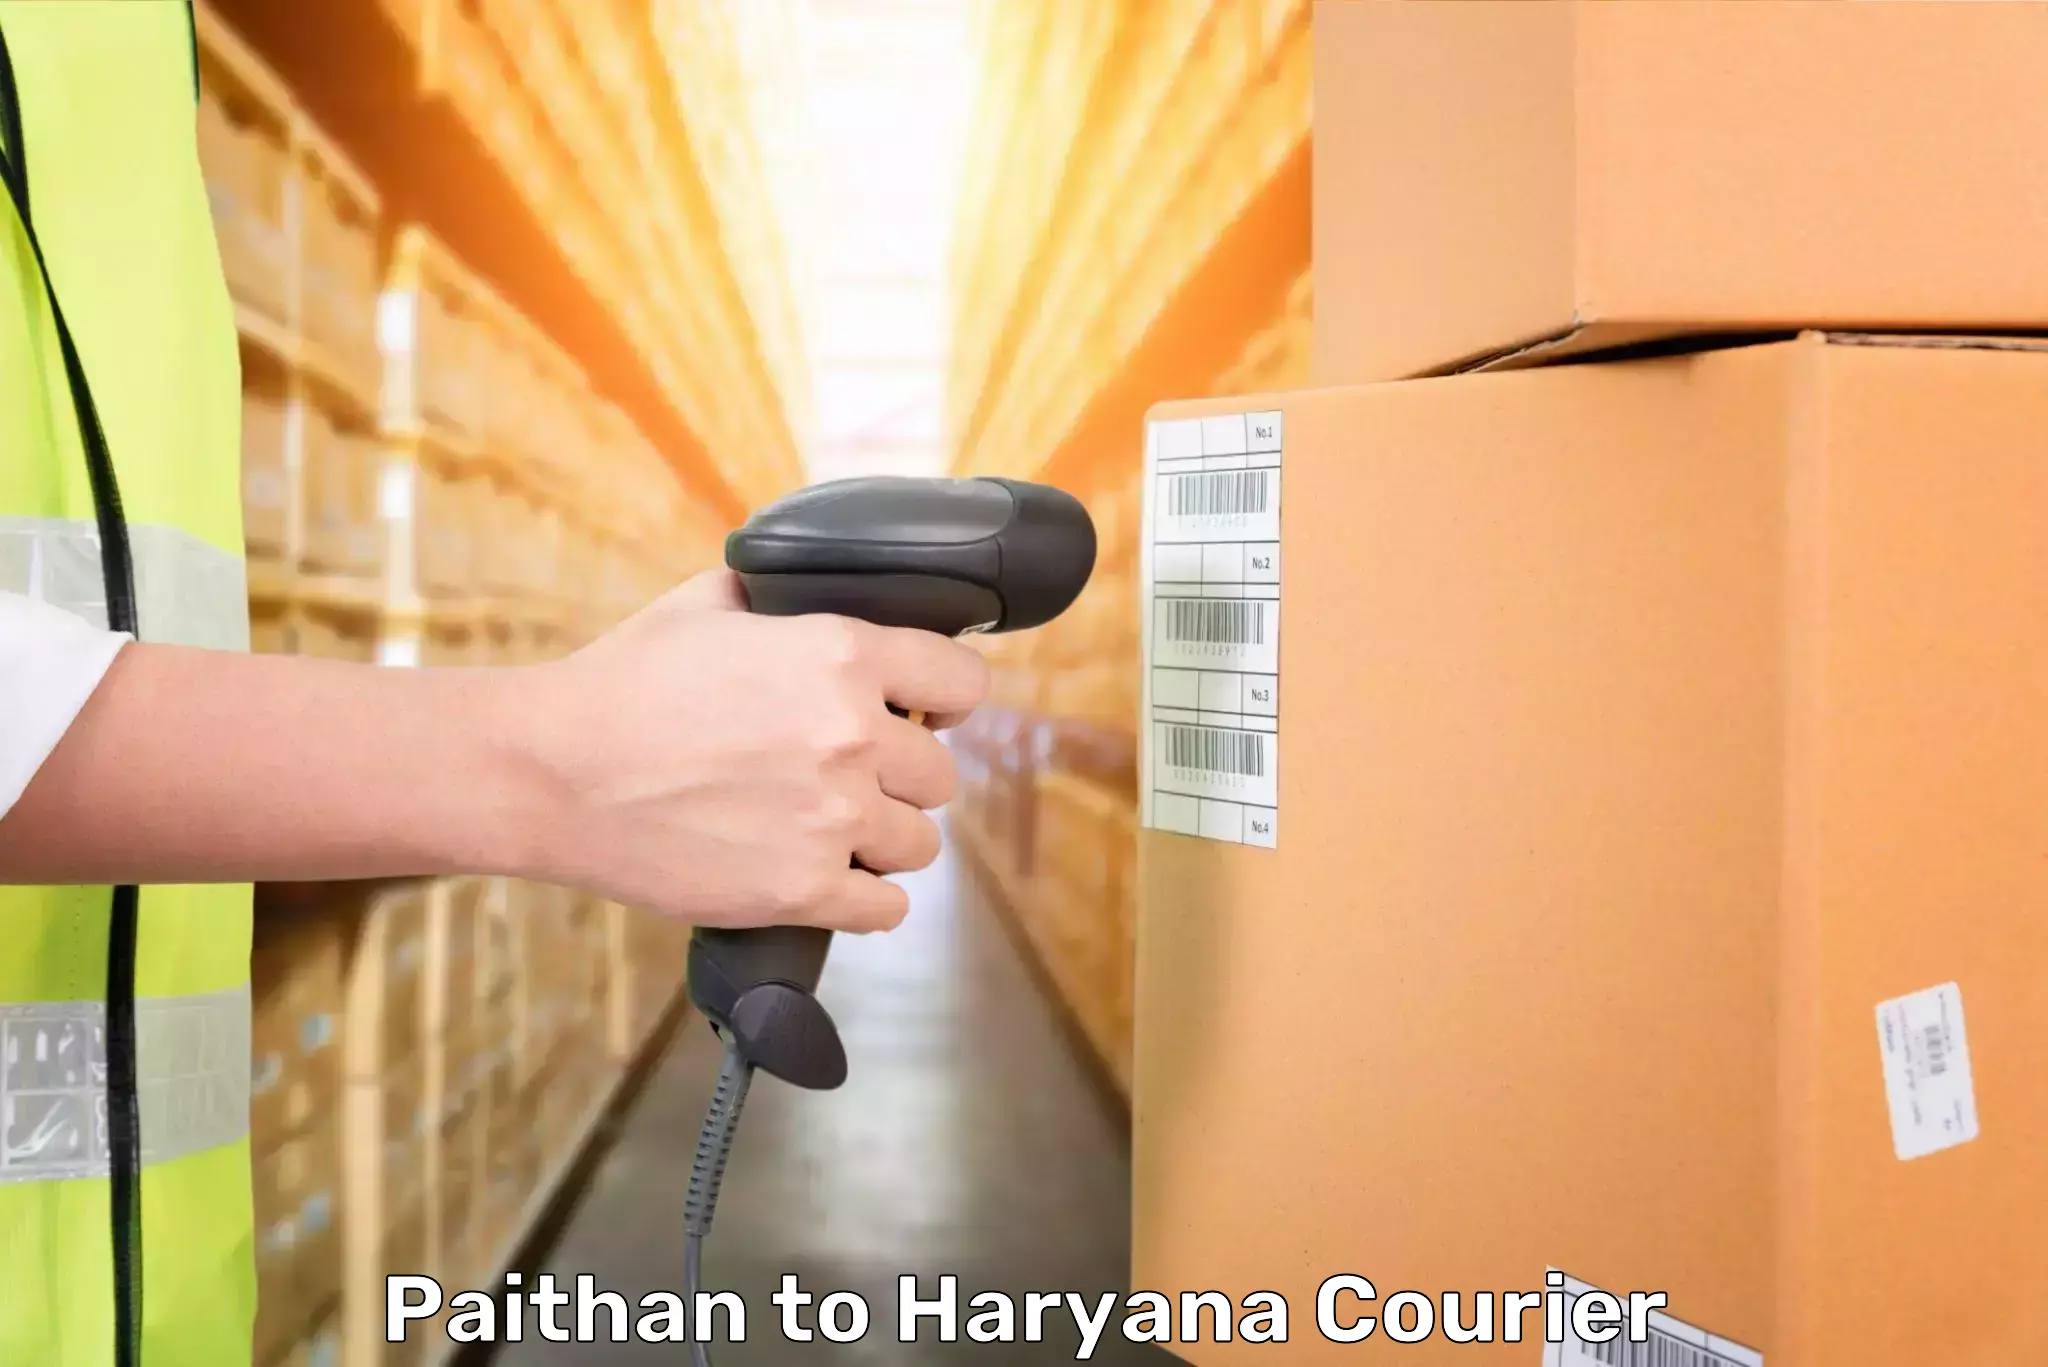 Luggage transport consultancy Paithan to Haryana